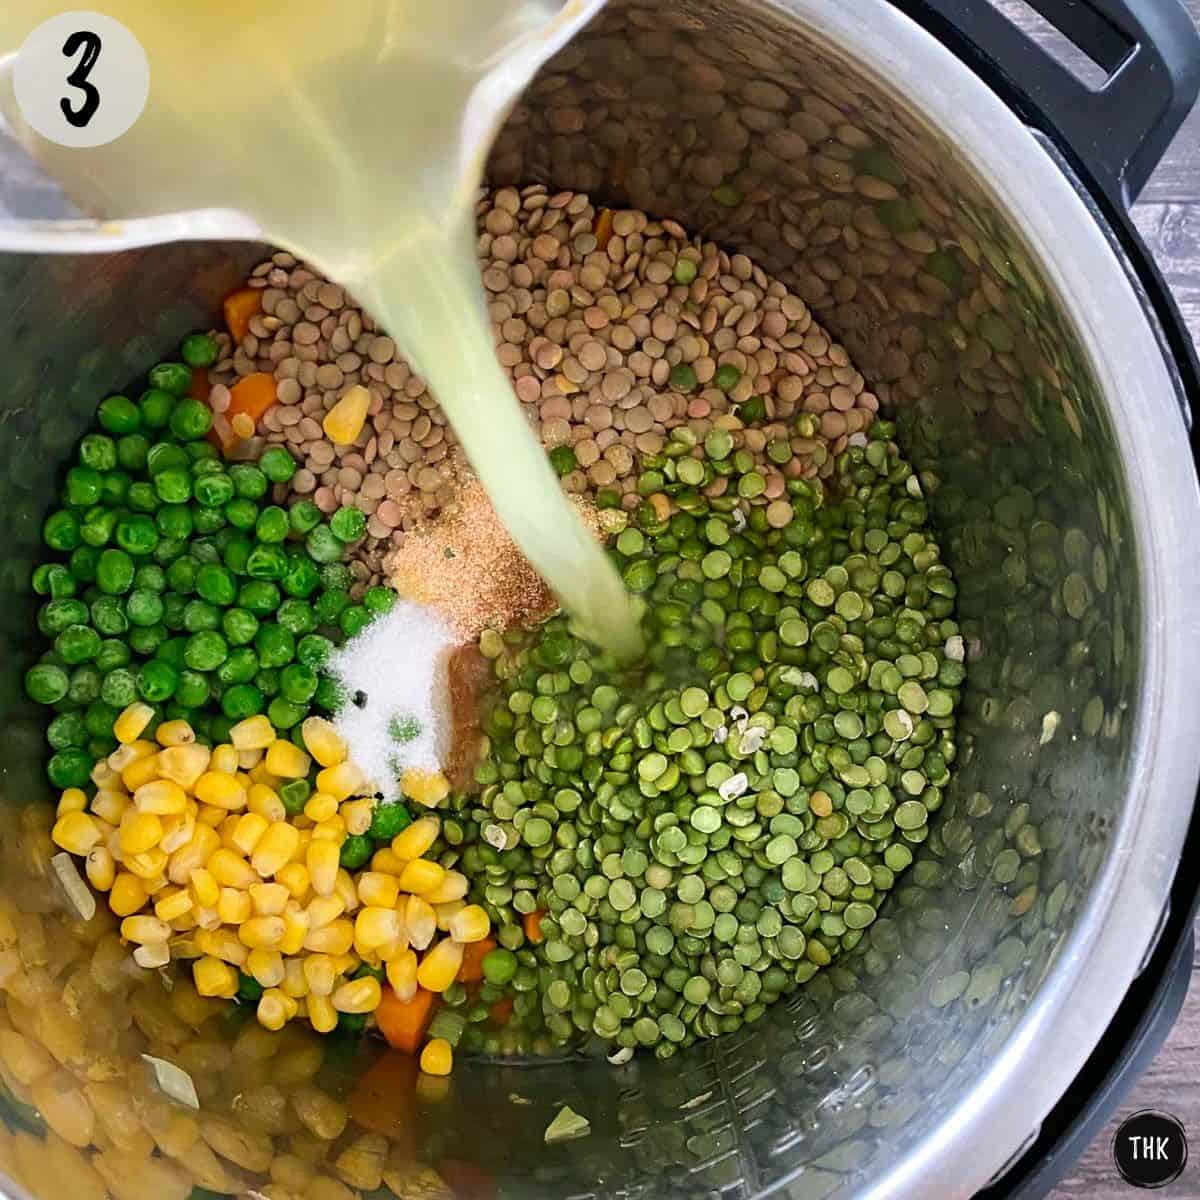 Broth being poured into Instant Pot with lentils, split peas, corn and frozen green peas inside.